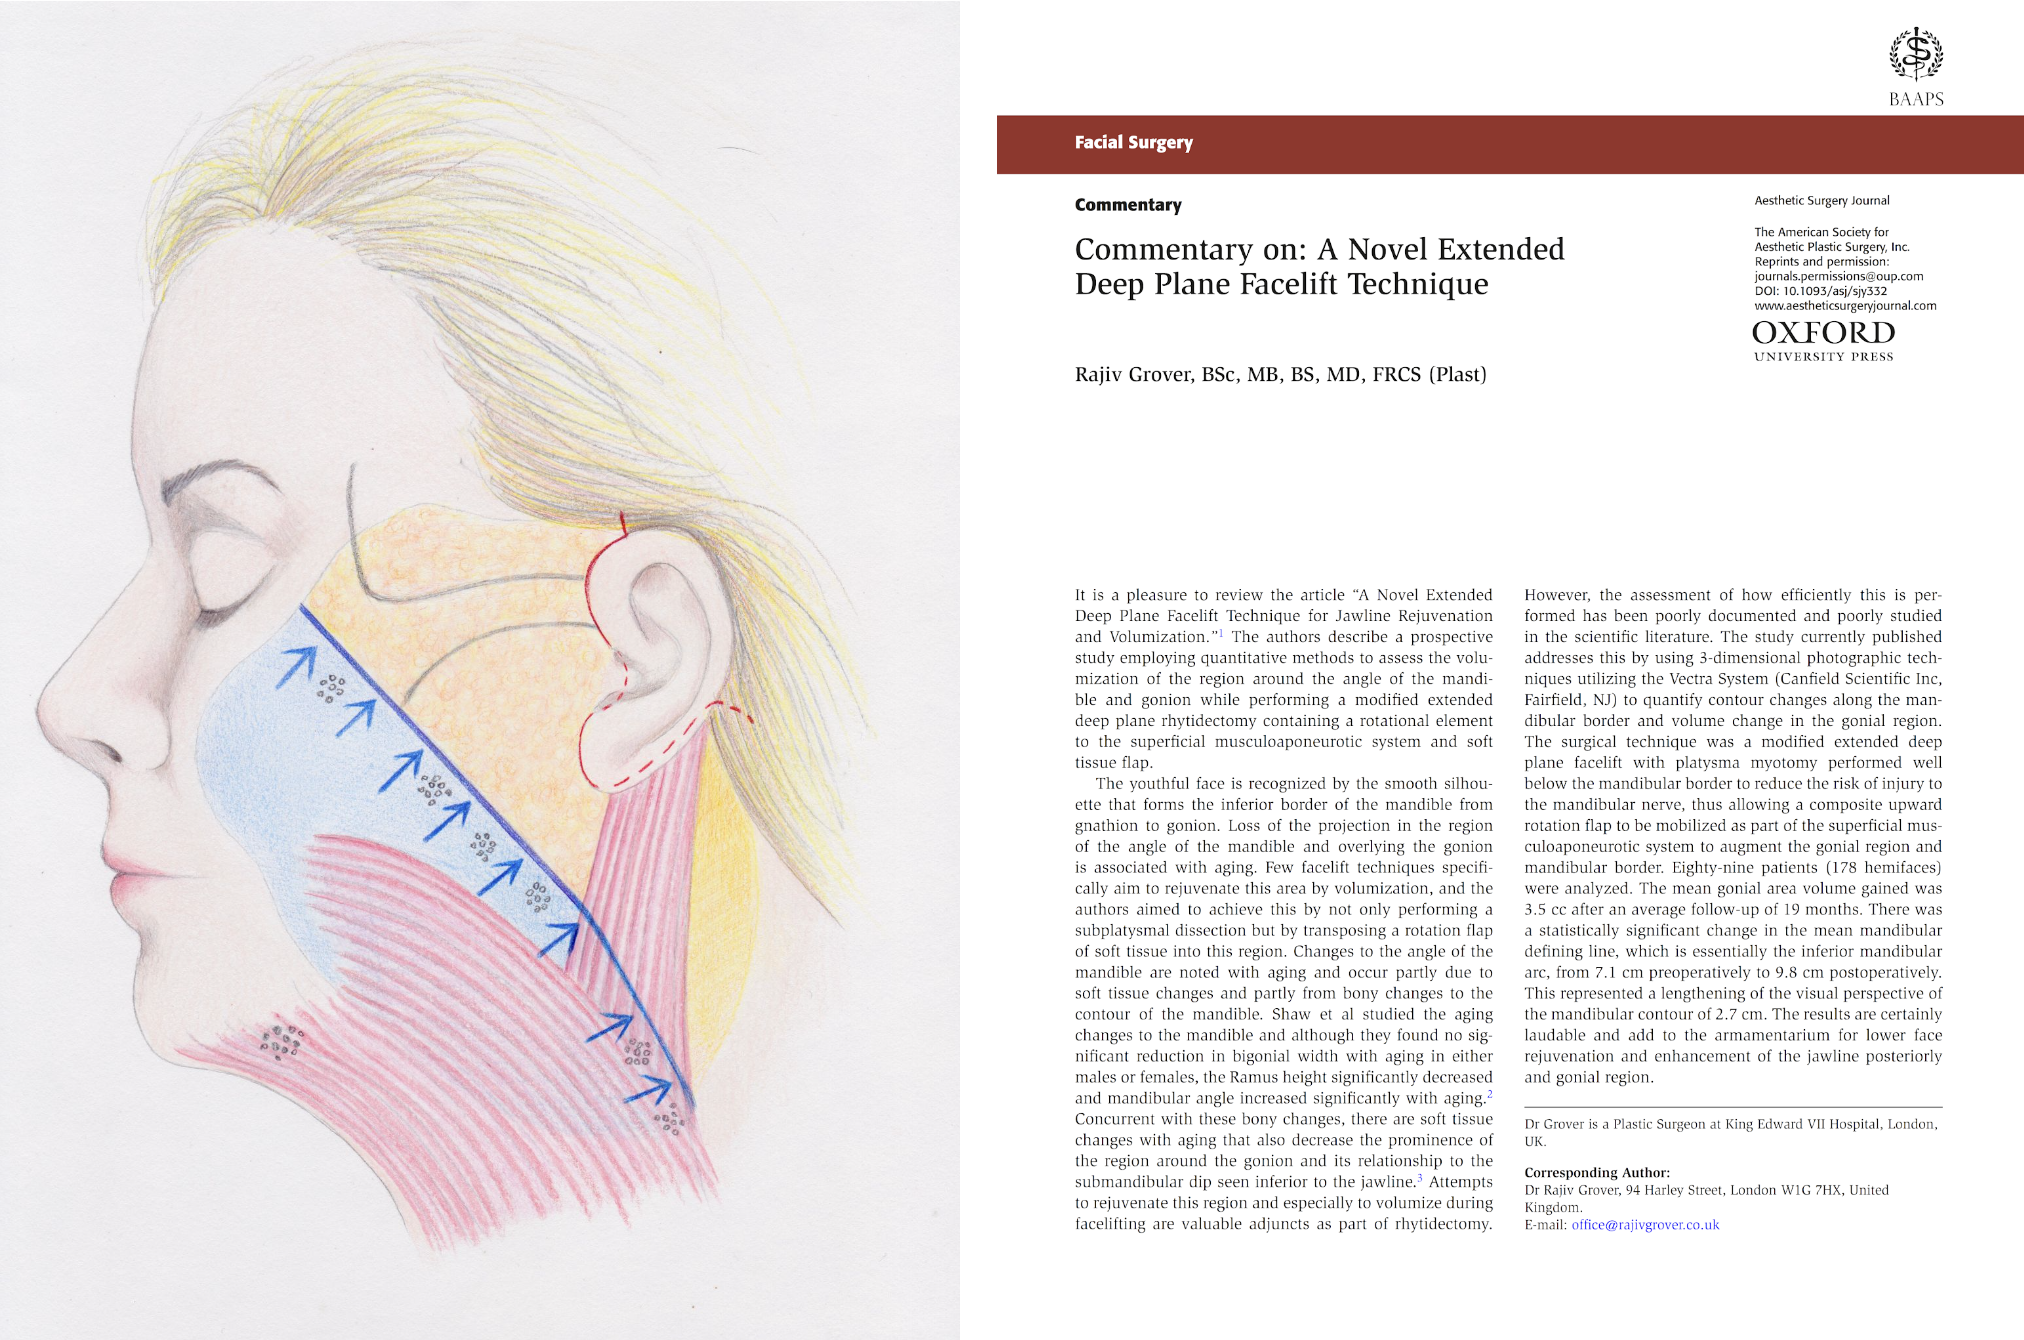 The Deep Plane Facelift Technique. Rajiv Grover was invited to publish a scientific commentary alongside Andrew Jacono’s Original work in the Aesthetic Surgery Journal (ASJ).